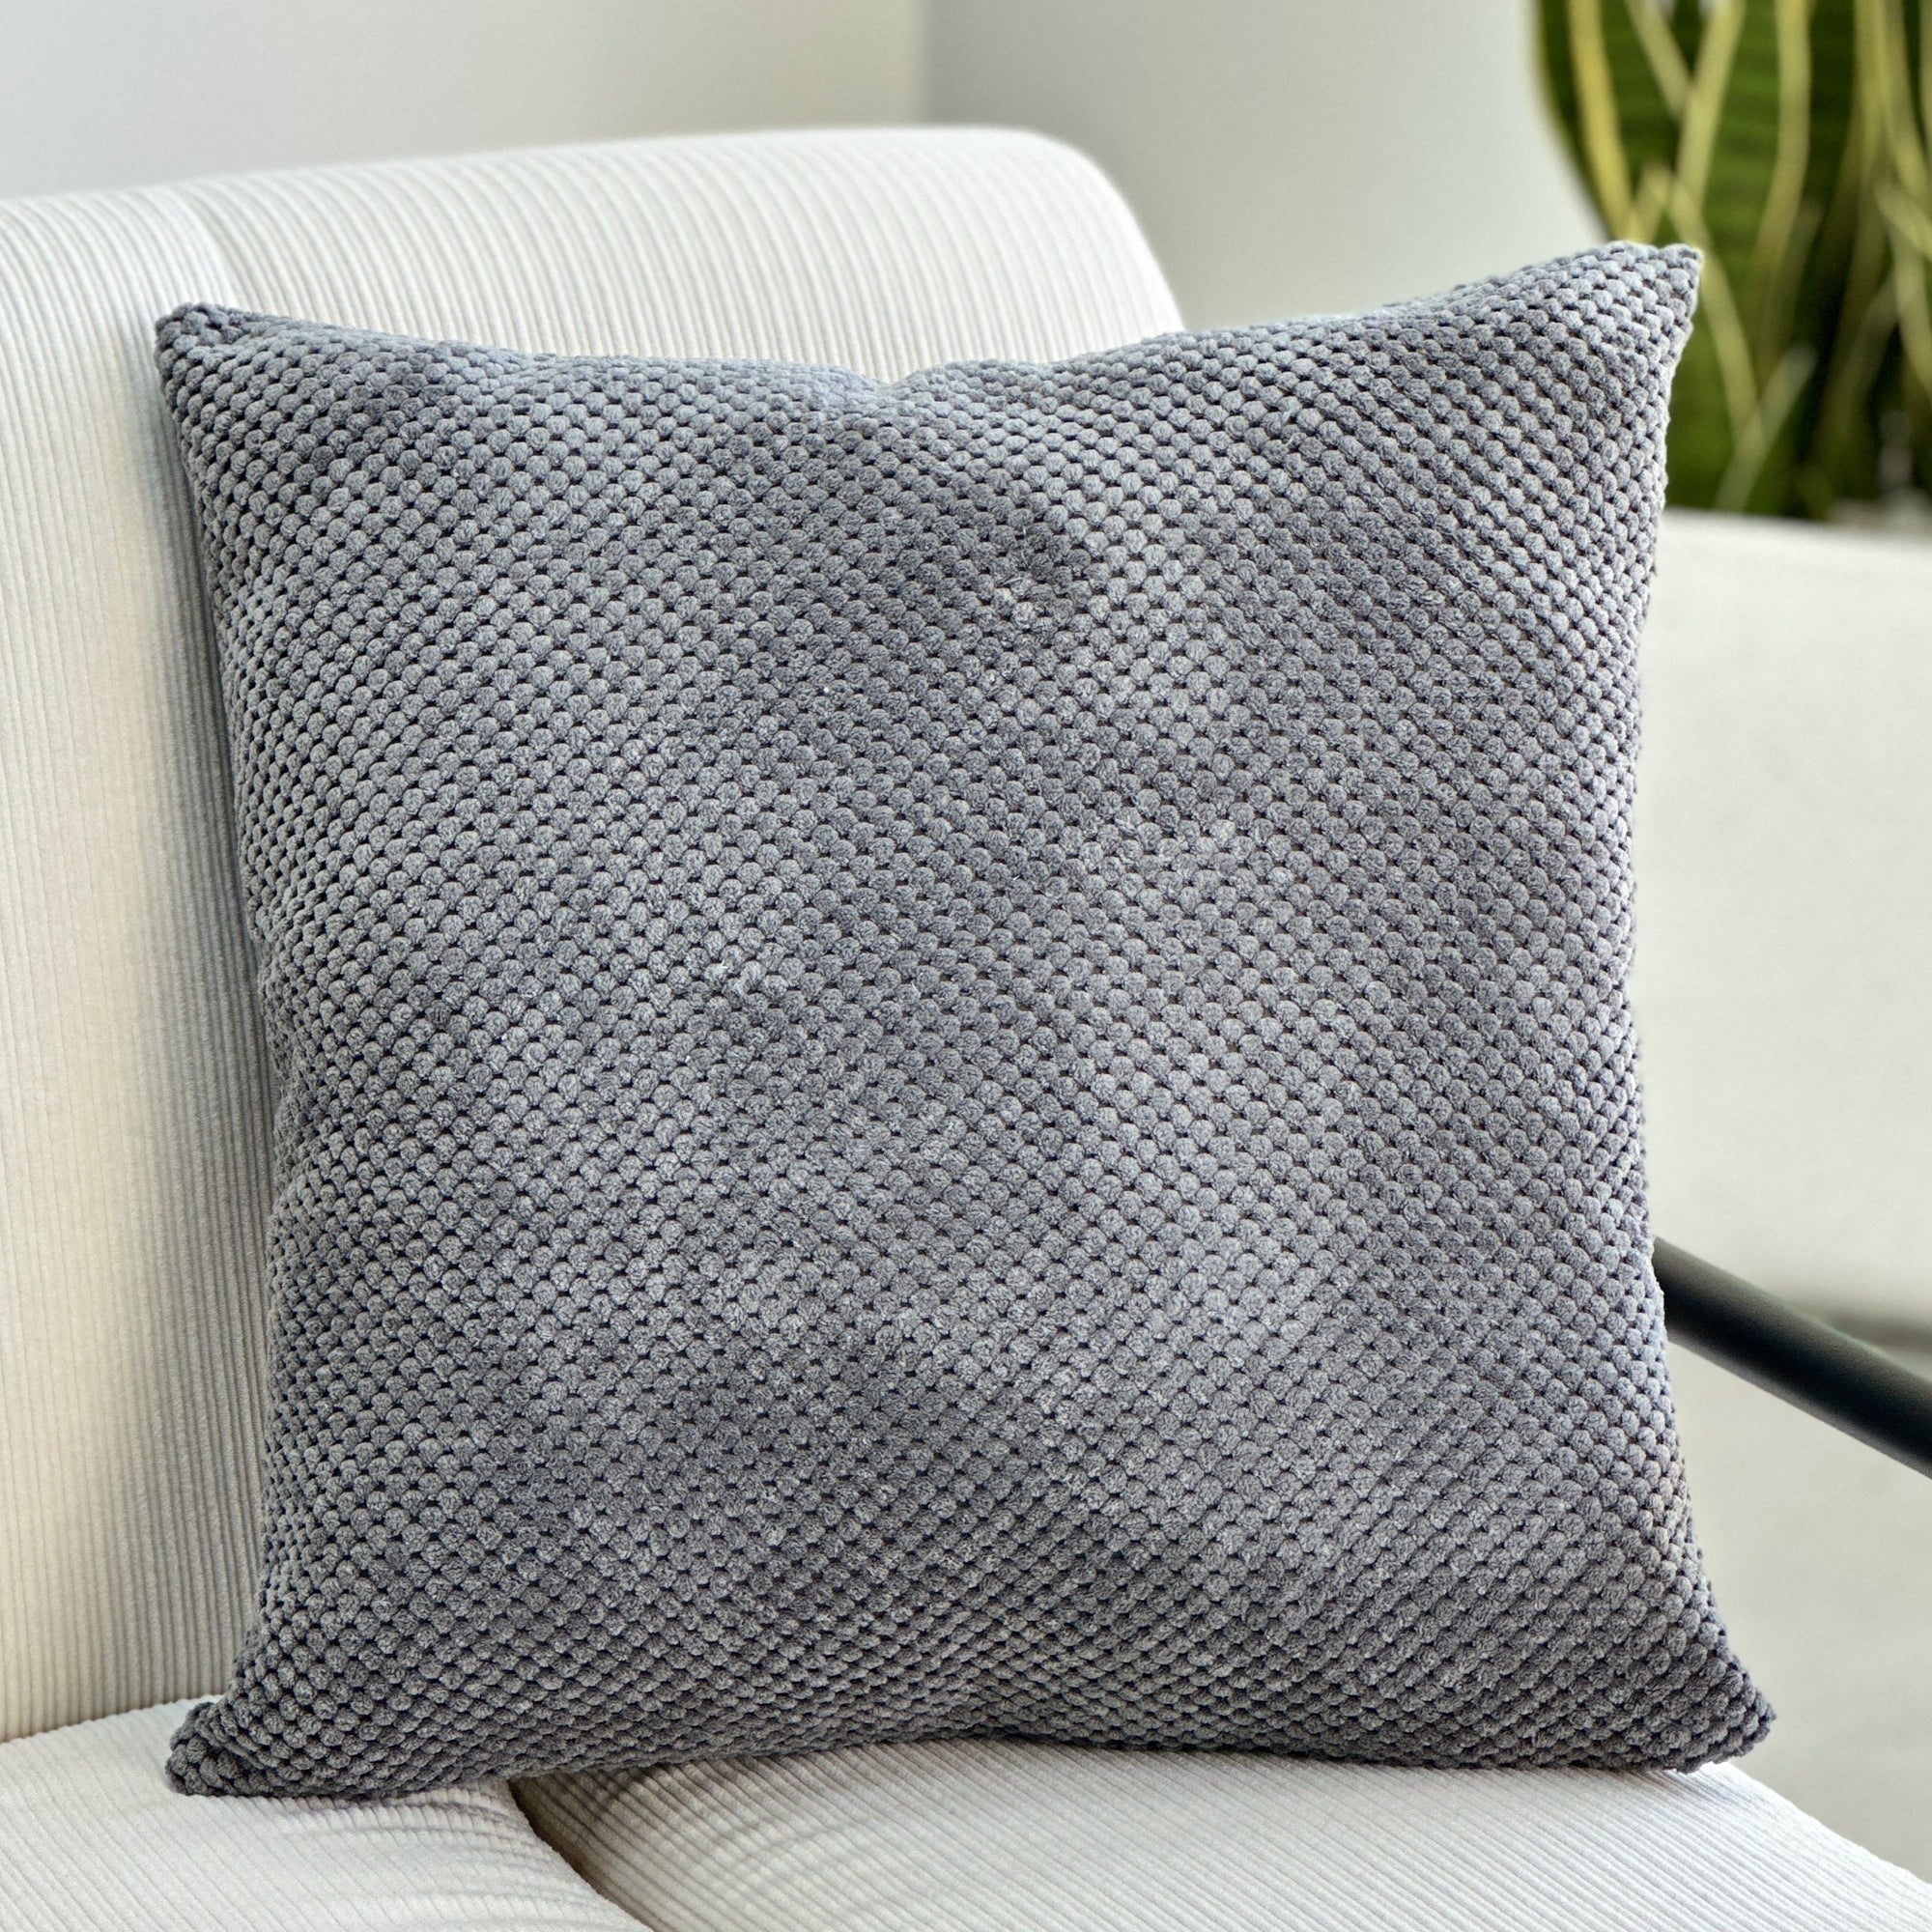 Solid Gray Mesh Pillow